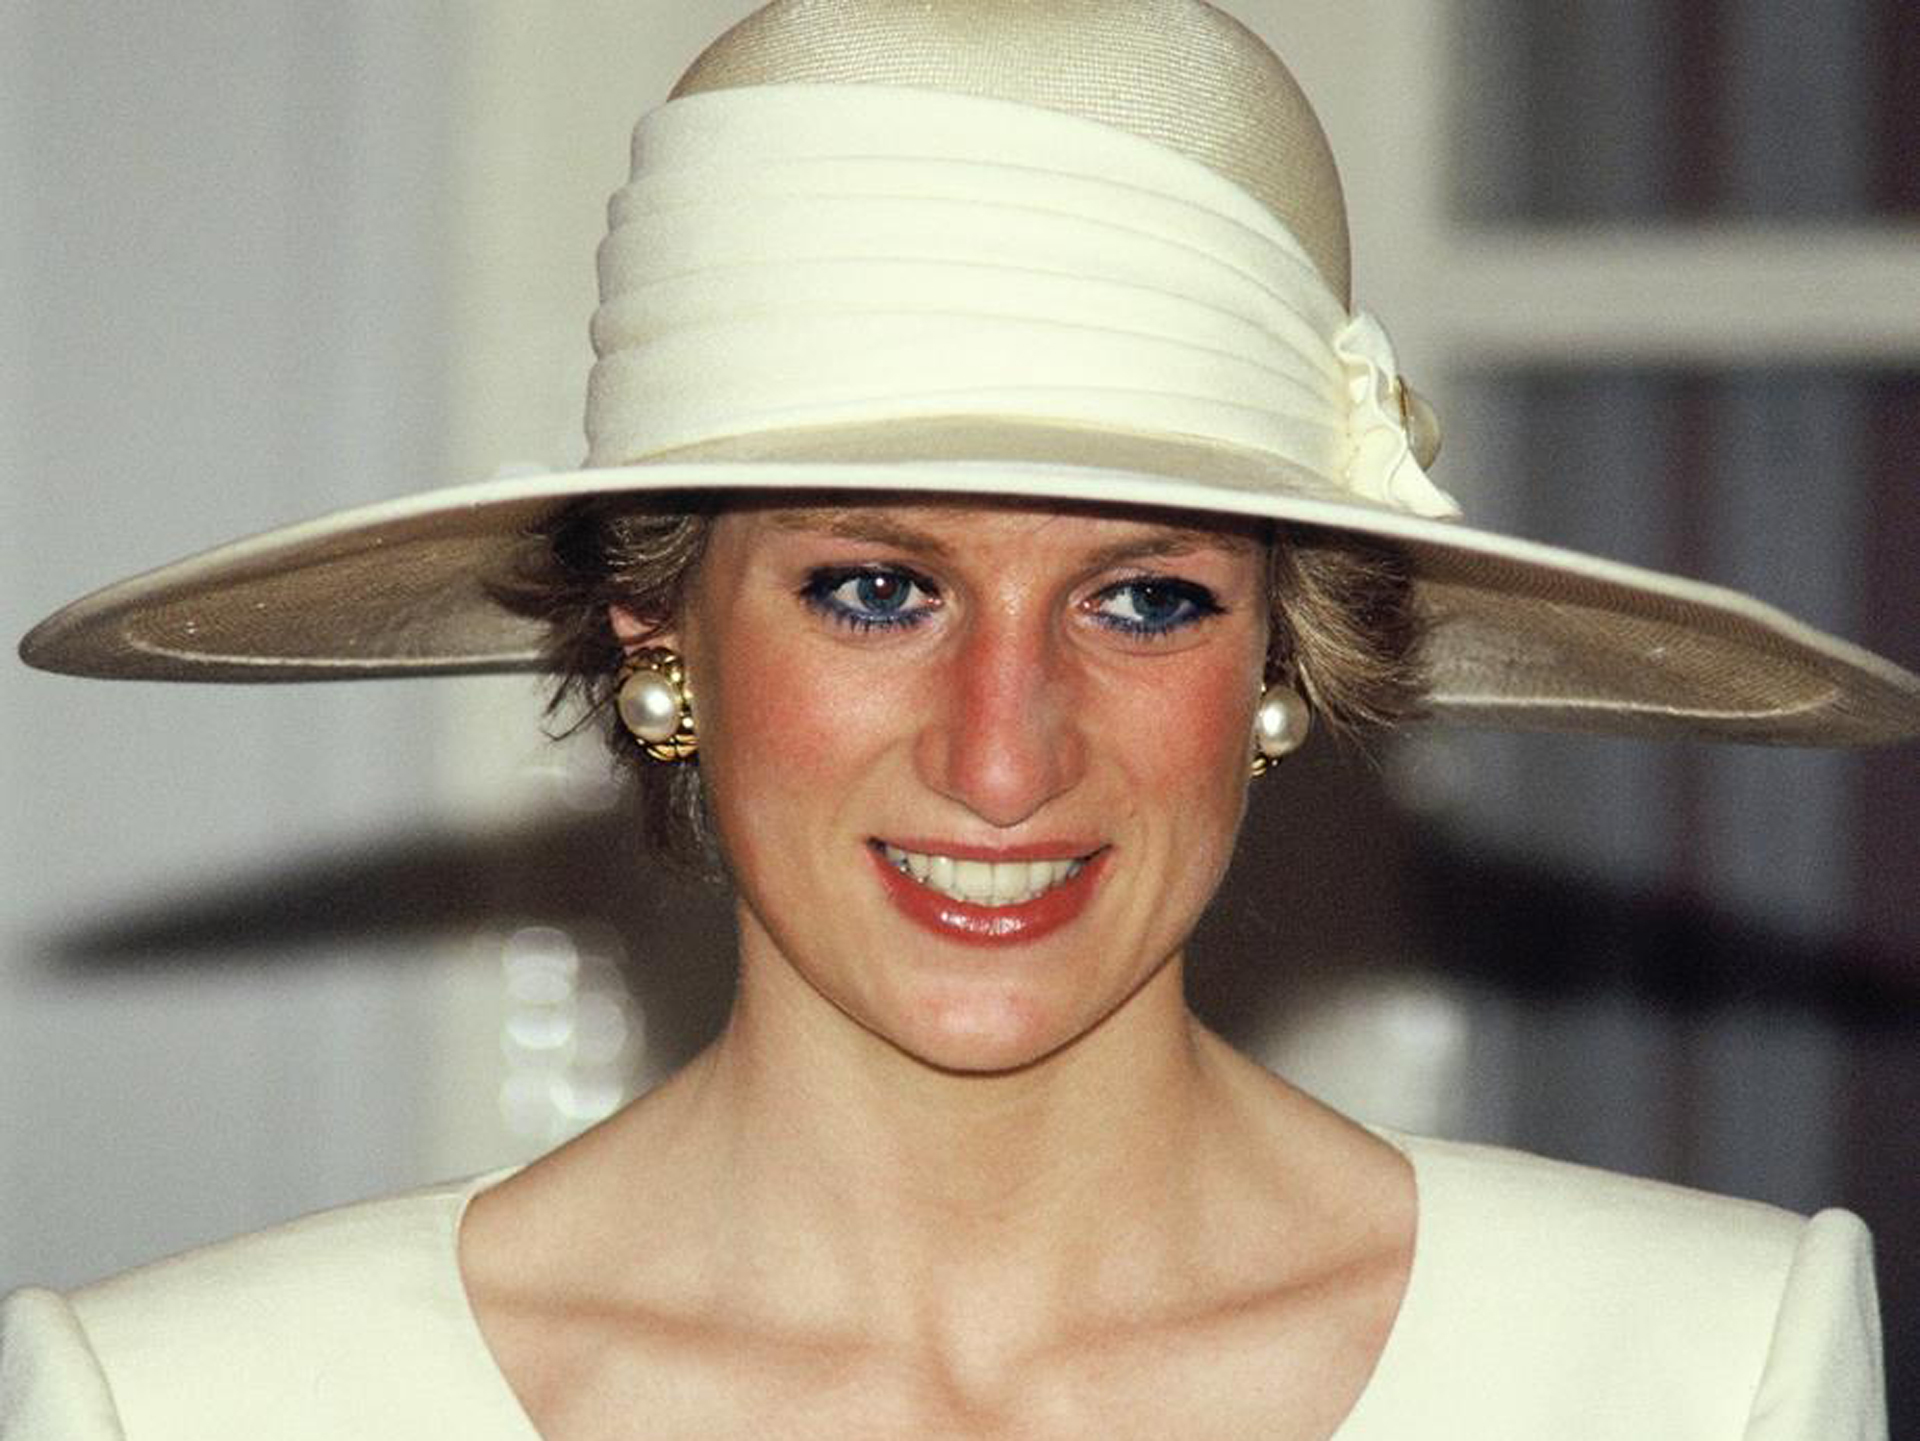 This is when The Crown will introduce Princess Diana